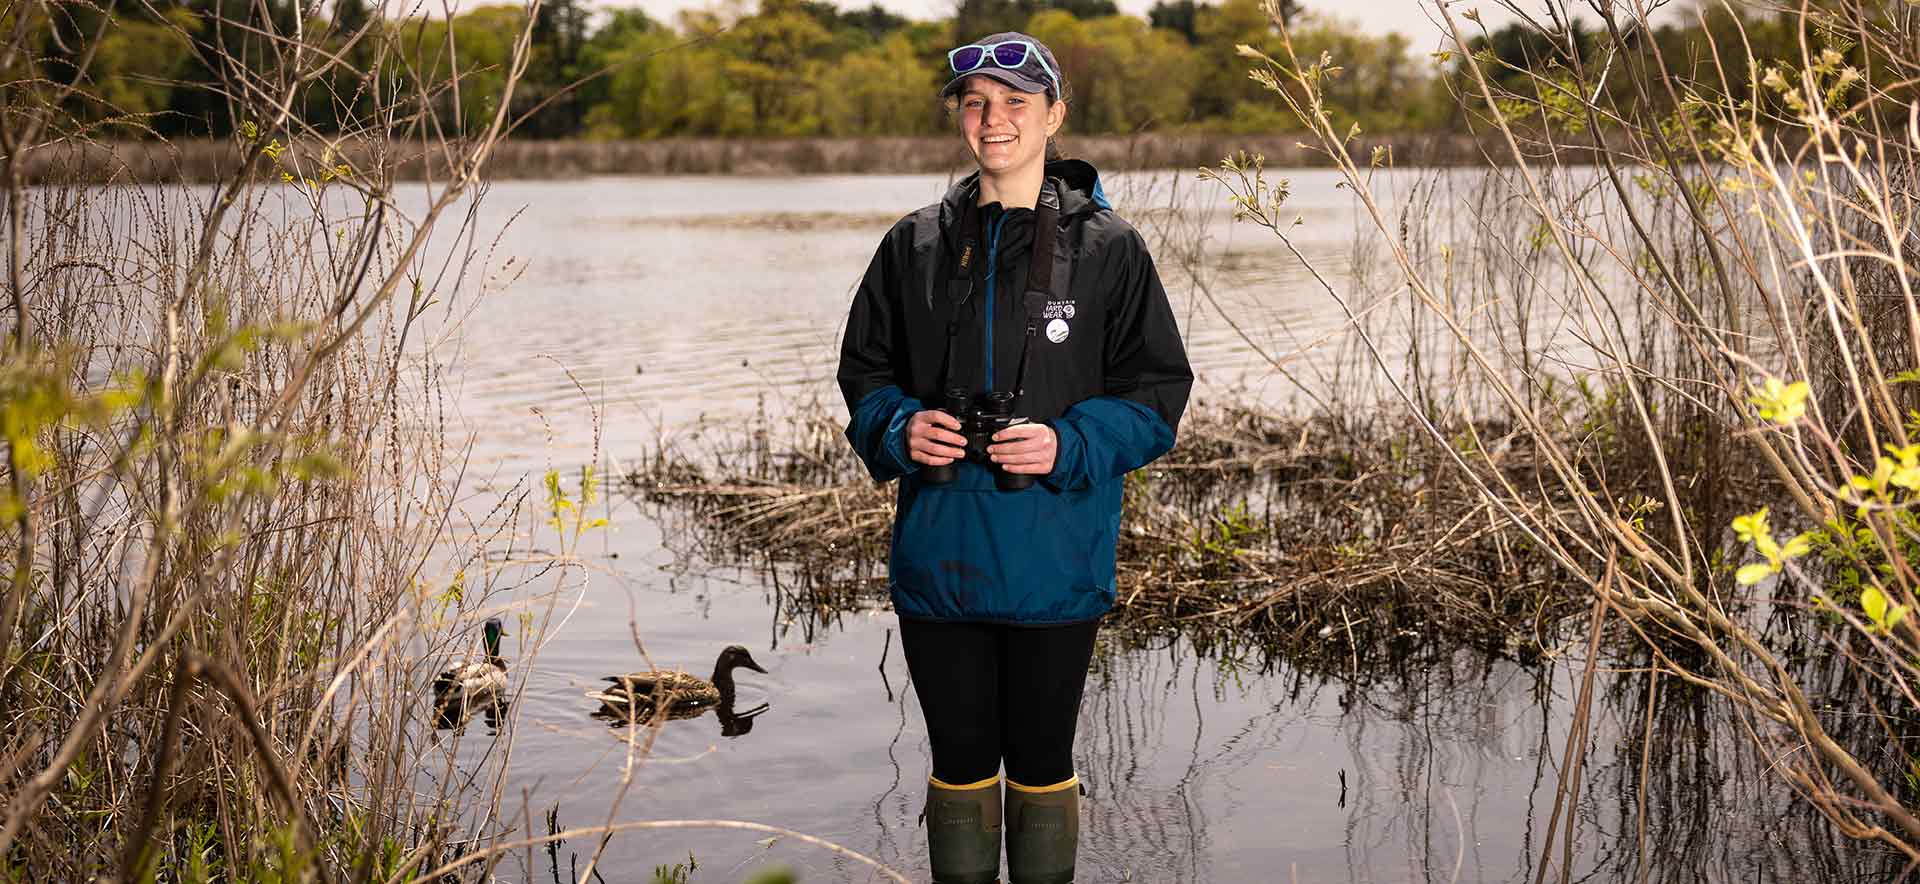 Kate Danziger stands in the Charles River holding binoculars, with blue sunglasses on the top of her head. Two ducks swim nearby.